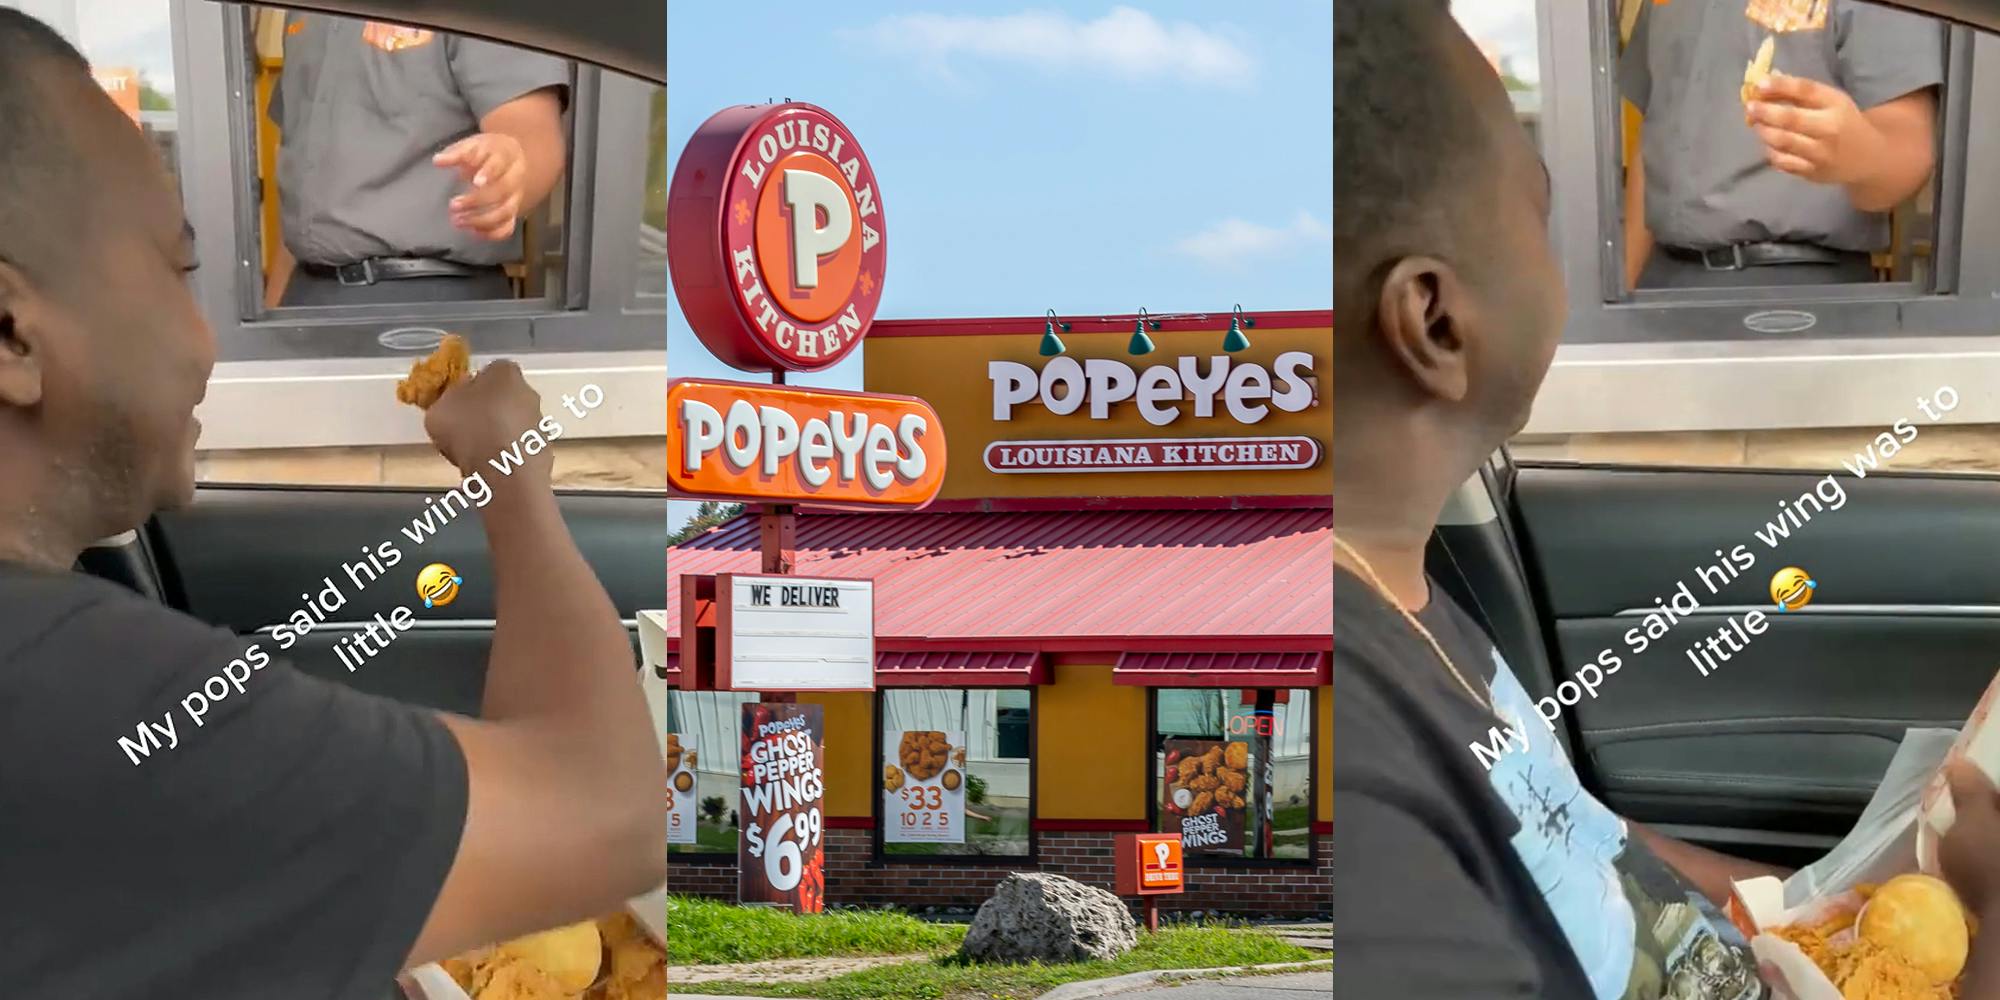 man at Popeye's drive thru window handing worker chicken wing caption "My pops said his wing was to little" (l) Popeye's restaurant with sign (c) man at Popeye's drive thru window with worker holding chicken wing caption "My pops said his wing was to little" (r)